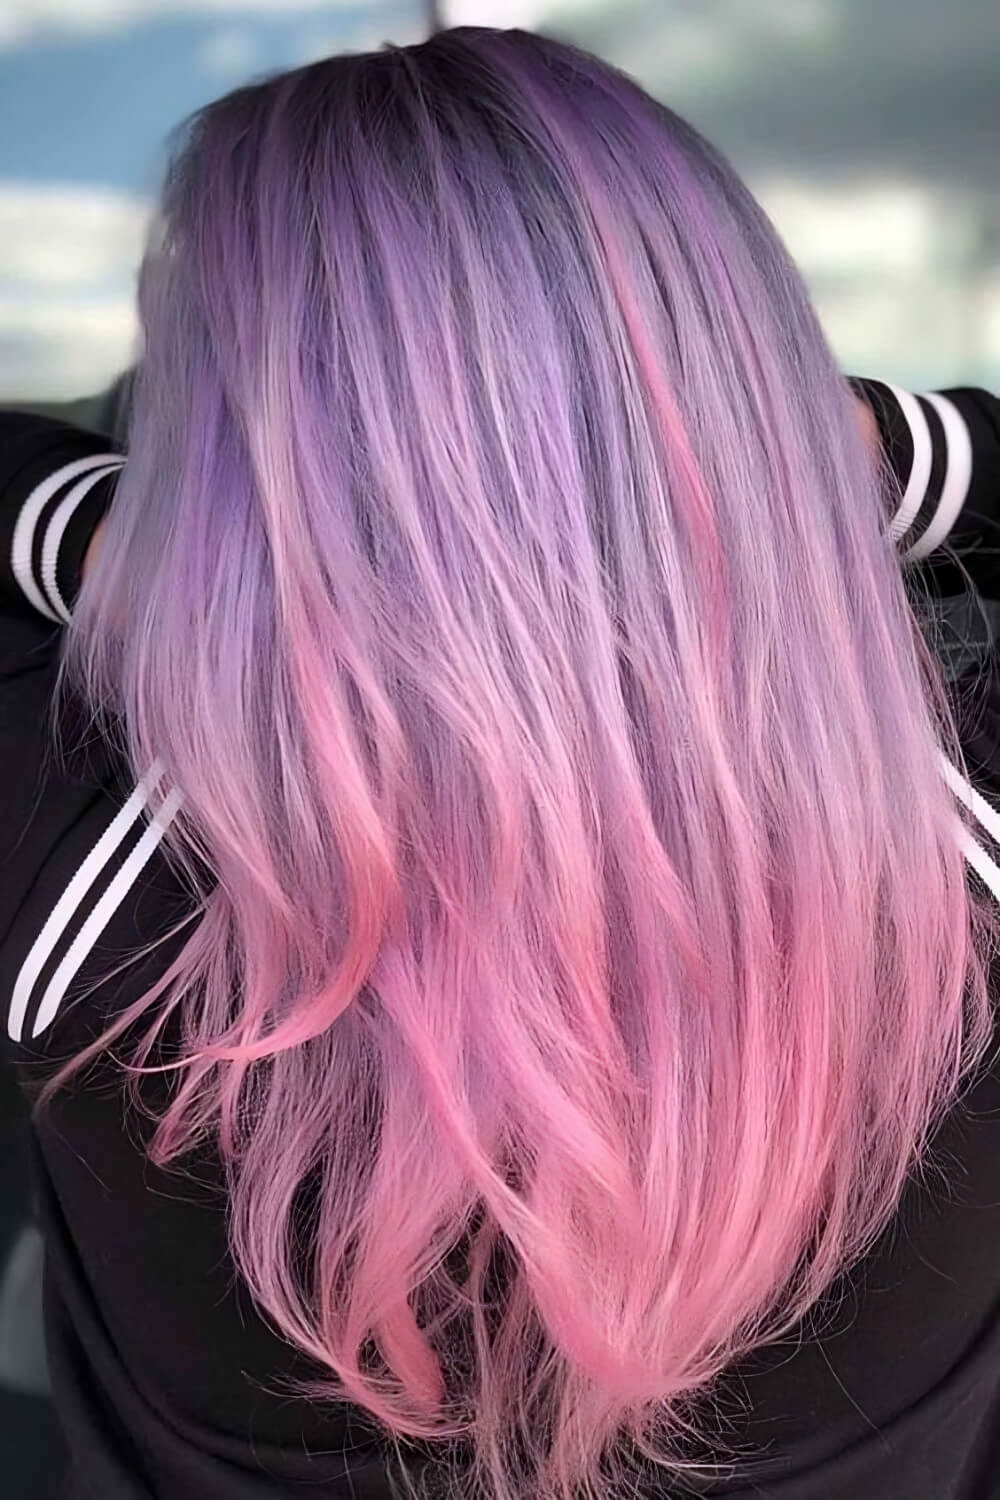 25 Lavender Hair Ideas Every Pretty Girl Should Check Out - 175